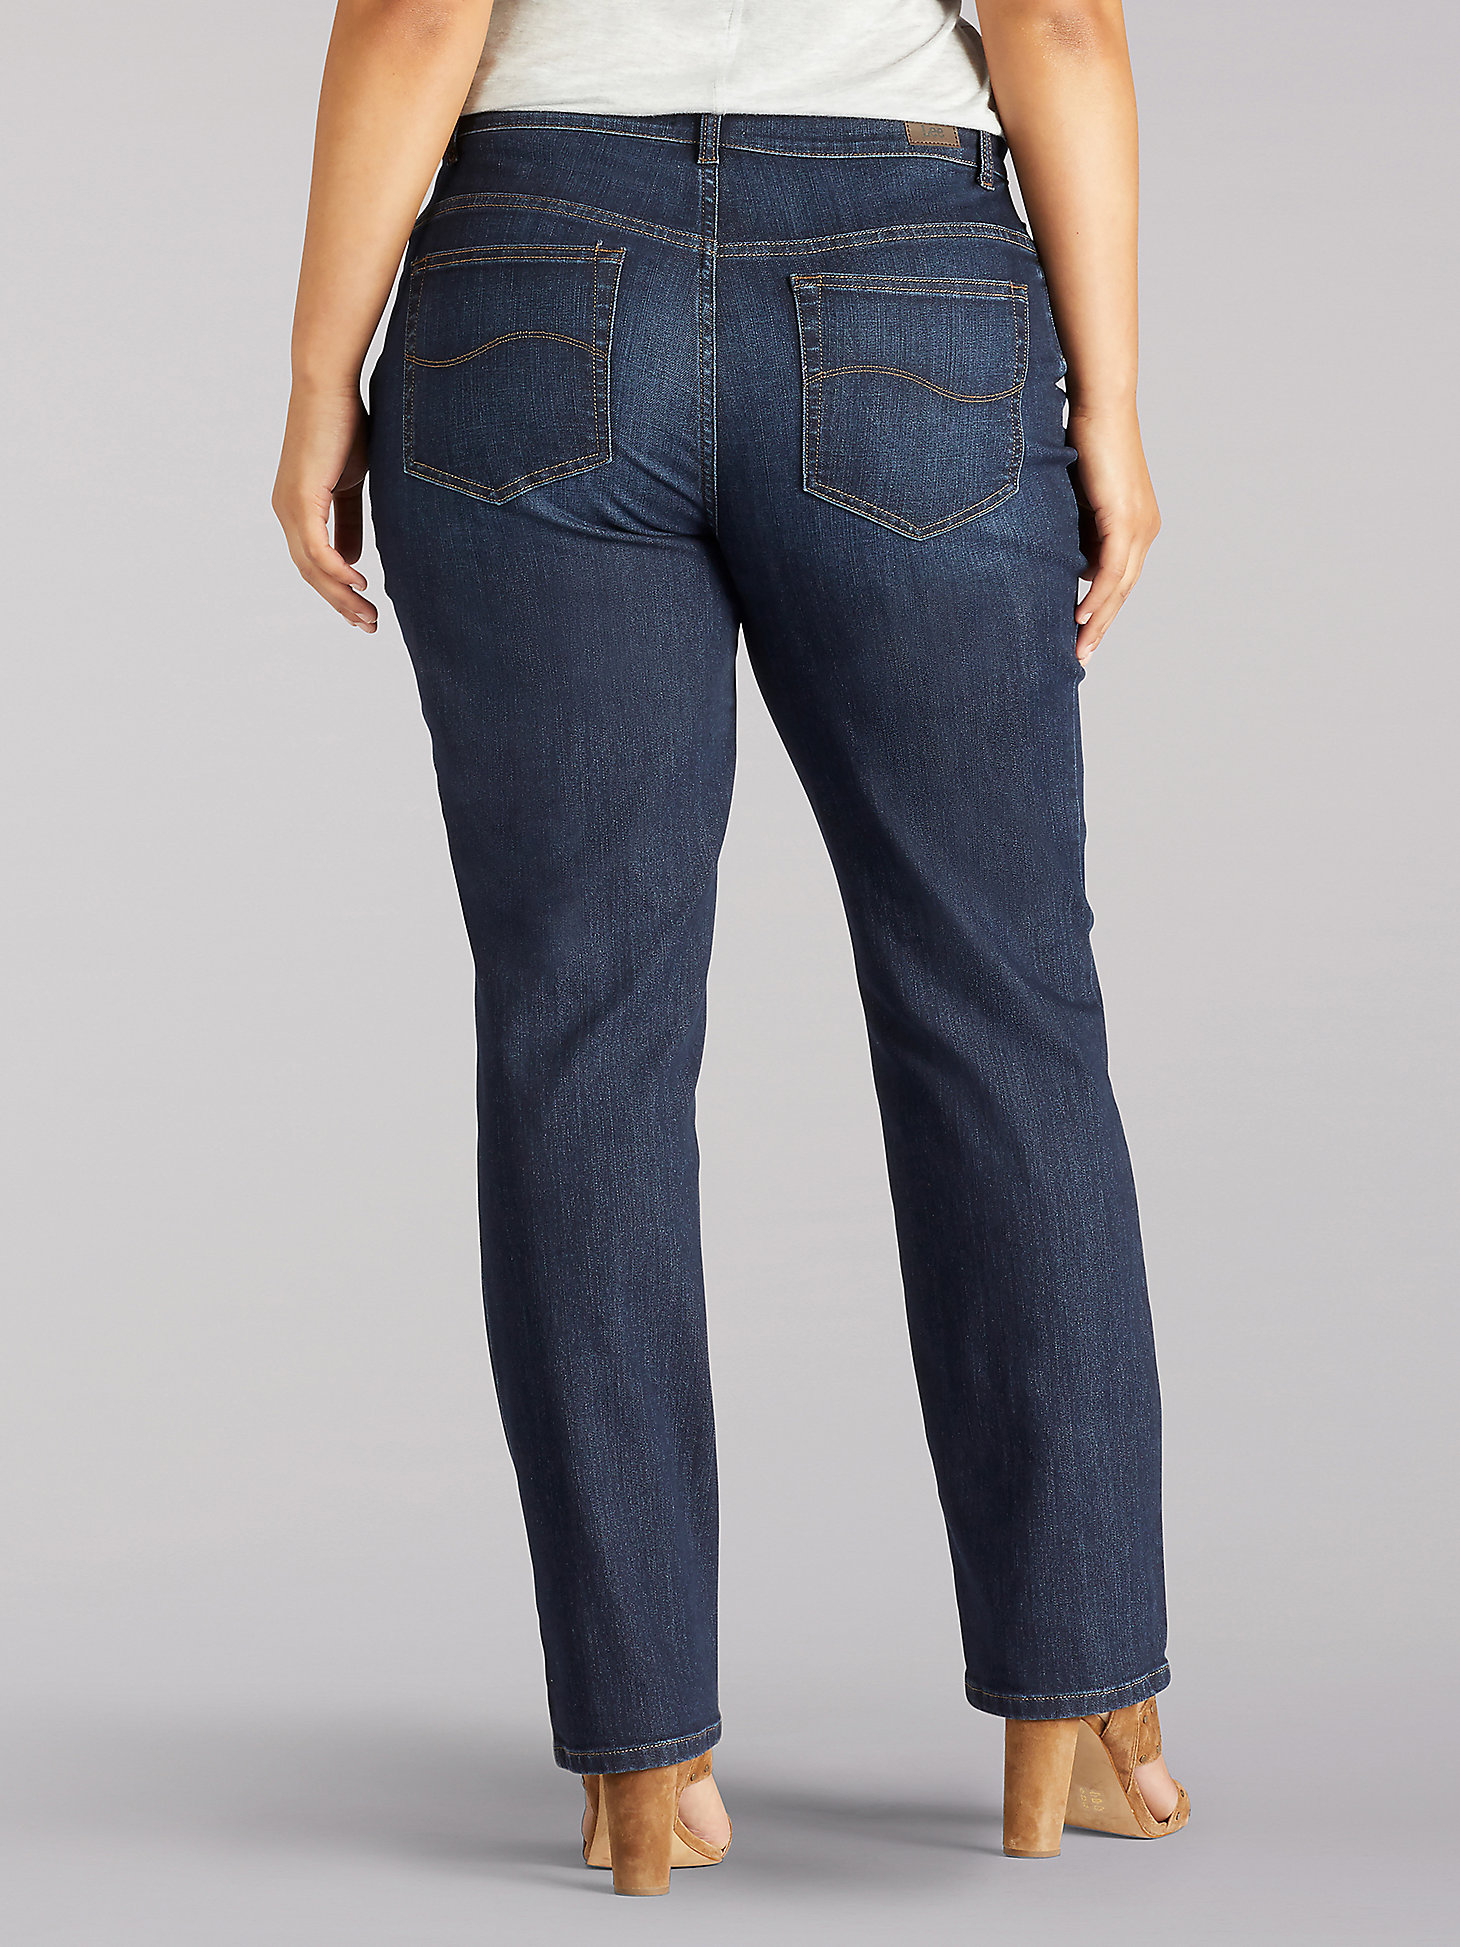 Women’s Stretch Relaxed Fit Straight Leg Jean (Plus) in Verona alternative view 1